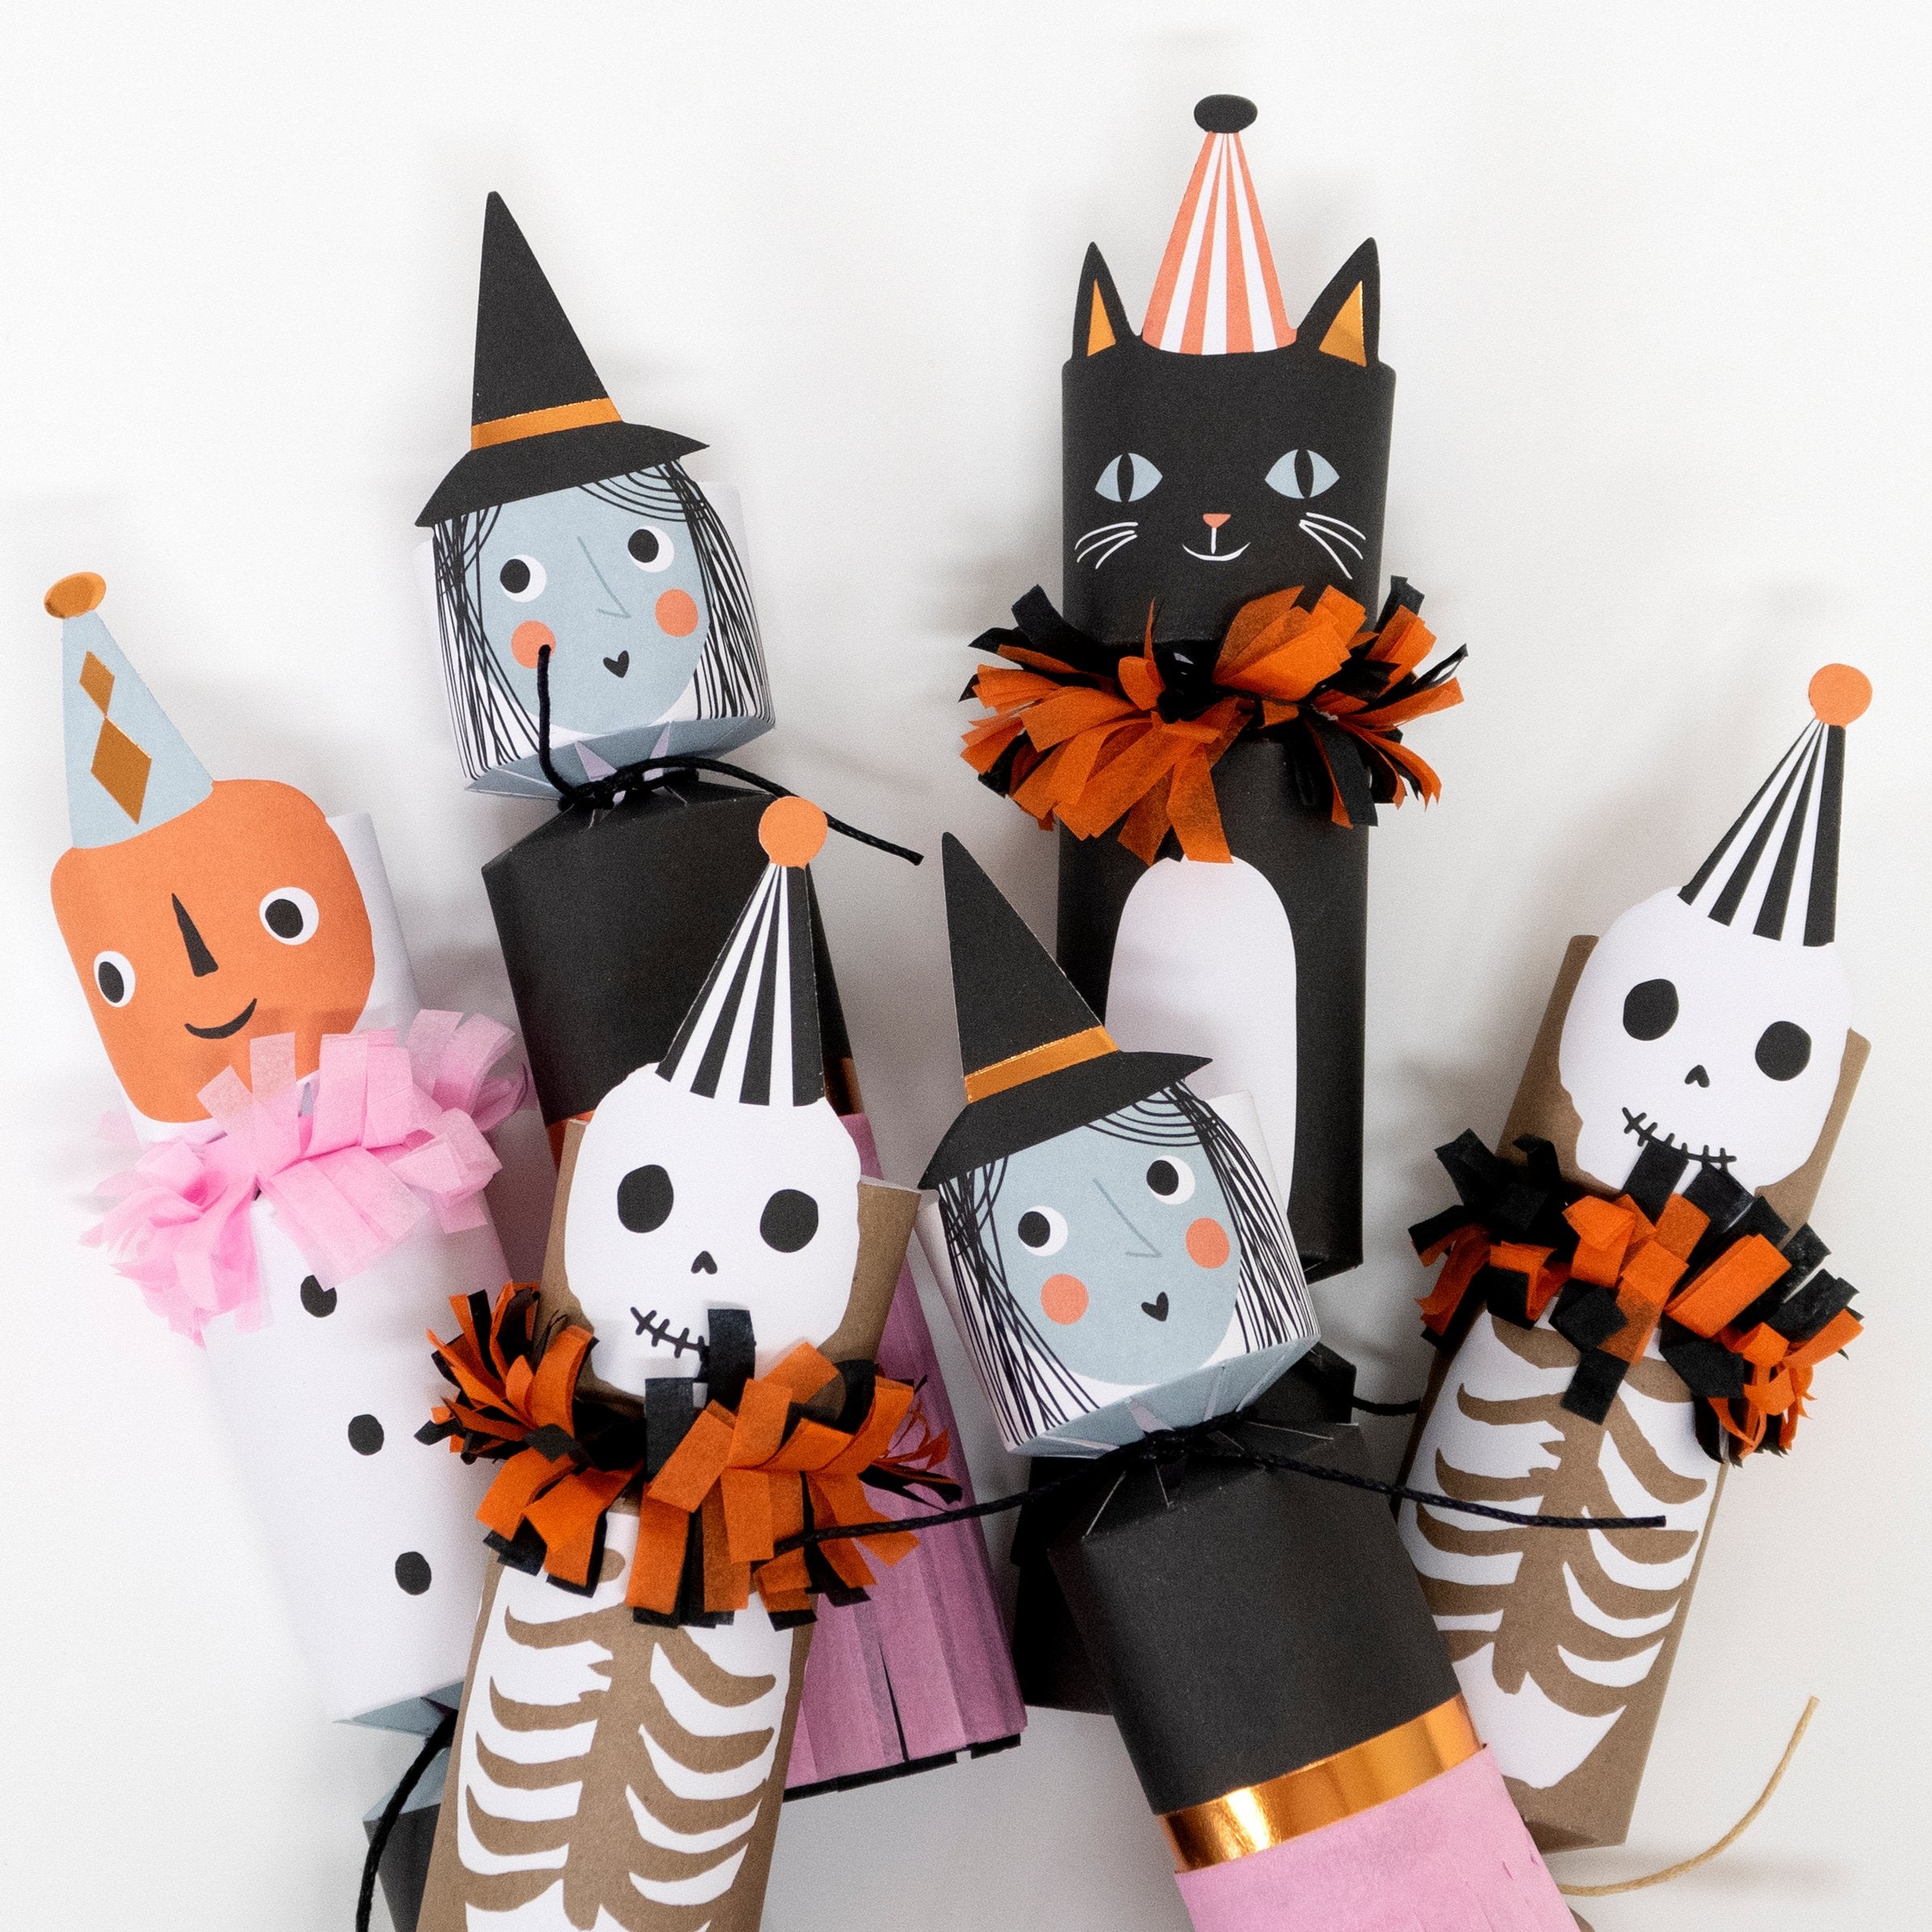 These crackers are filled with sensational Halloween gifts, and decorated with Halloween icons.